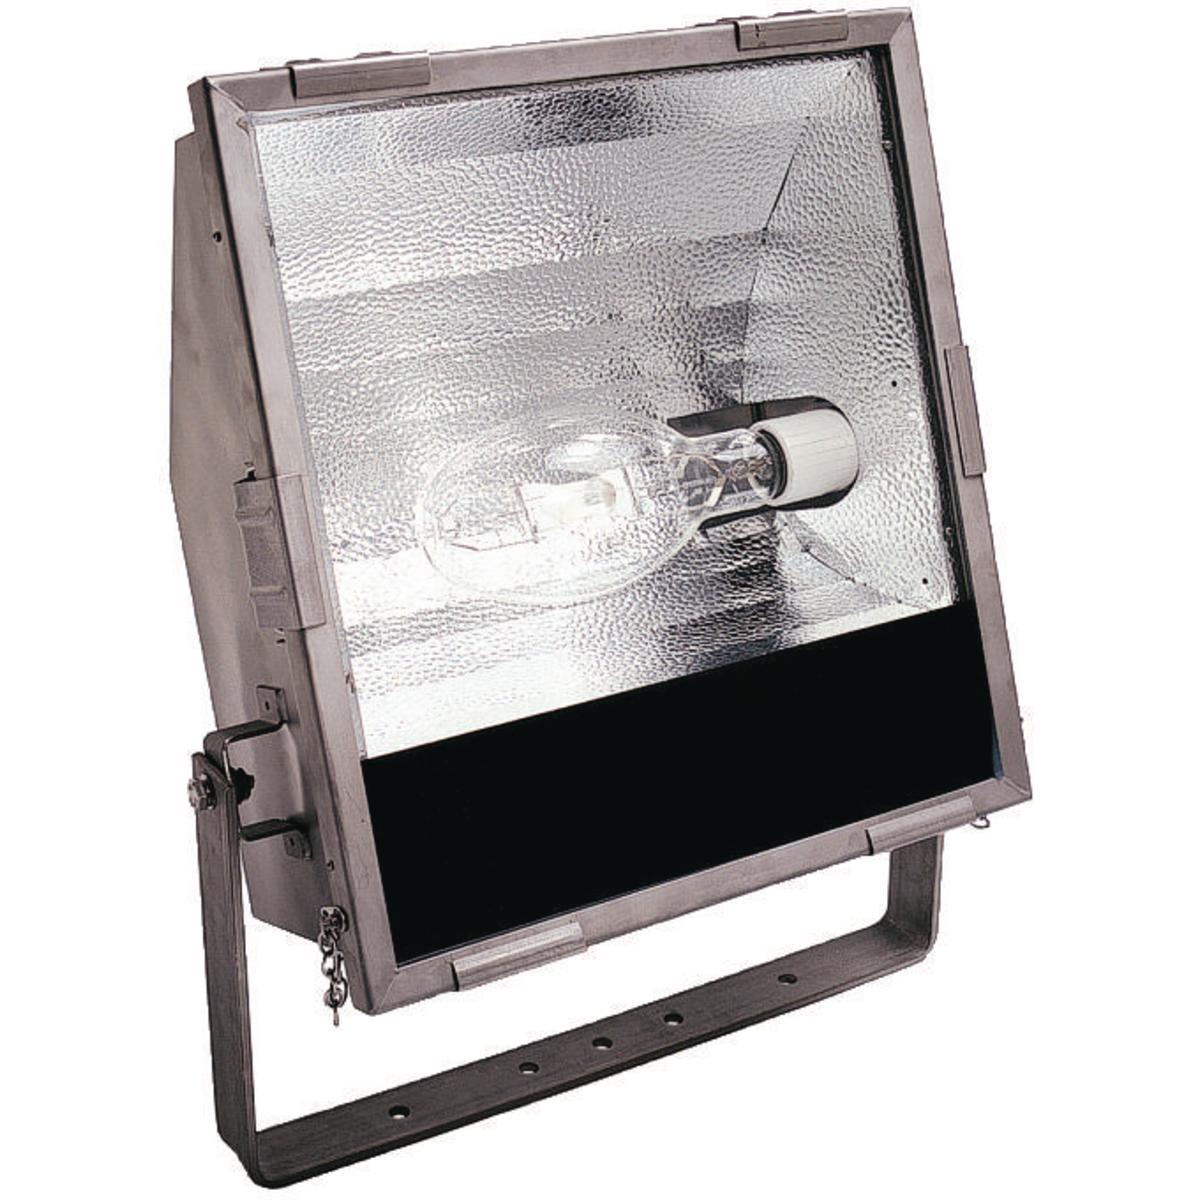 Hubbell KFS255SS KFSS Series - Stainless Steel 250 Watt High Pressure Sodium Marine Floodlight (Lamp Not Included) - 480V At 60Hz  ; Type 316 Stainless Steel Housing. 16-gauge housing ensures low corrosion and long life, reducing maintenance costs ; Rugged quick-release 3